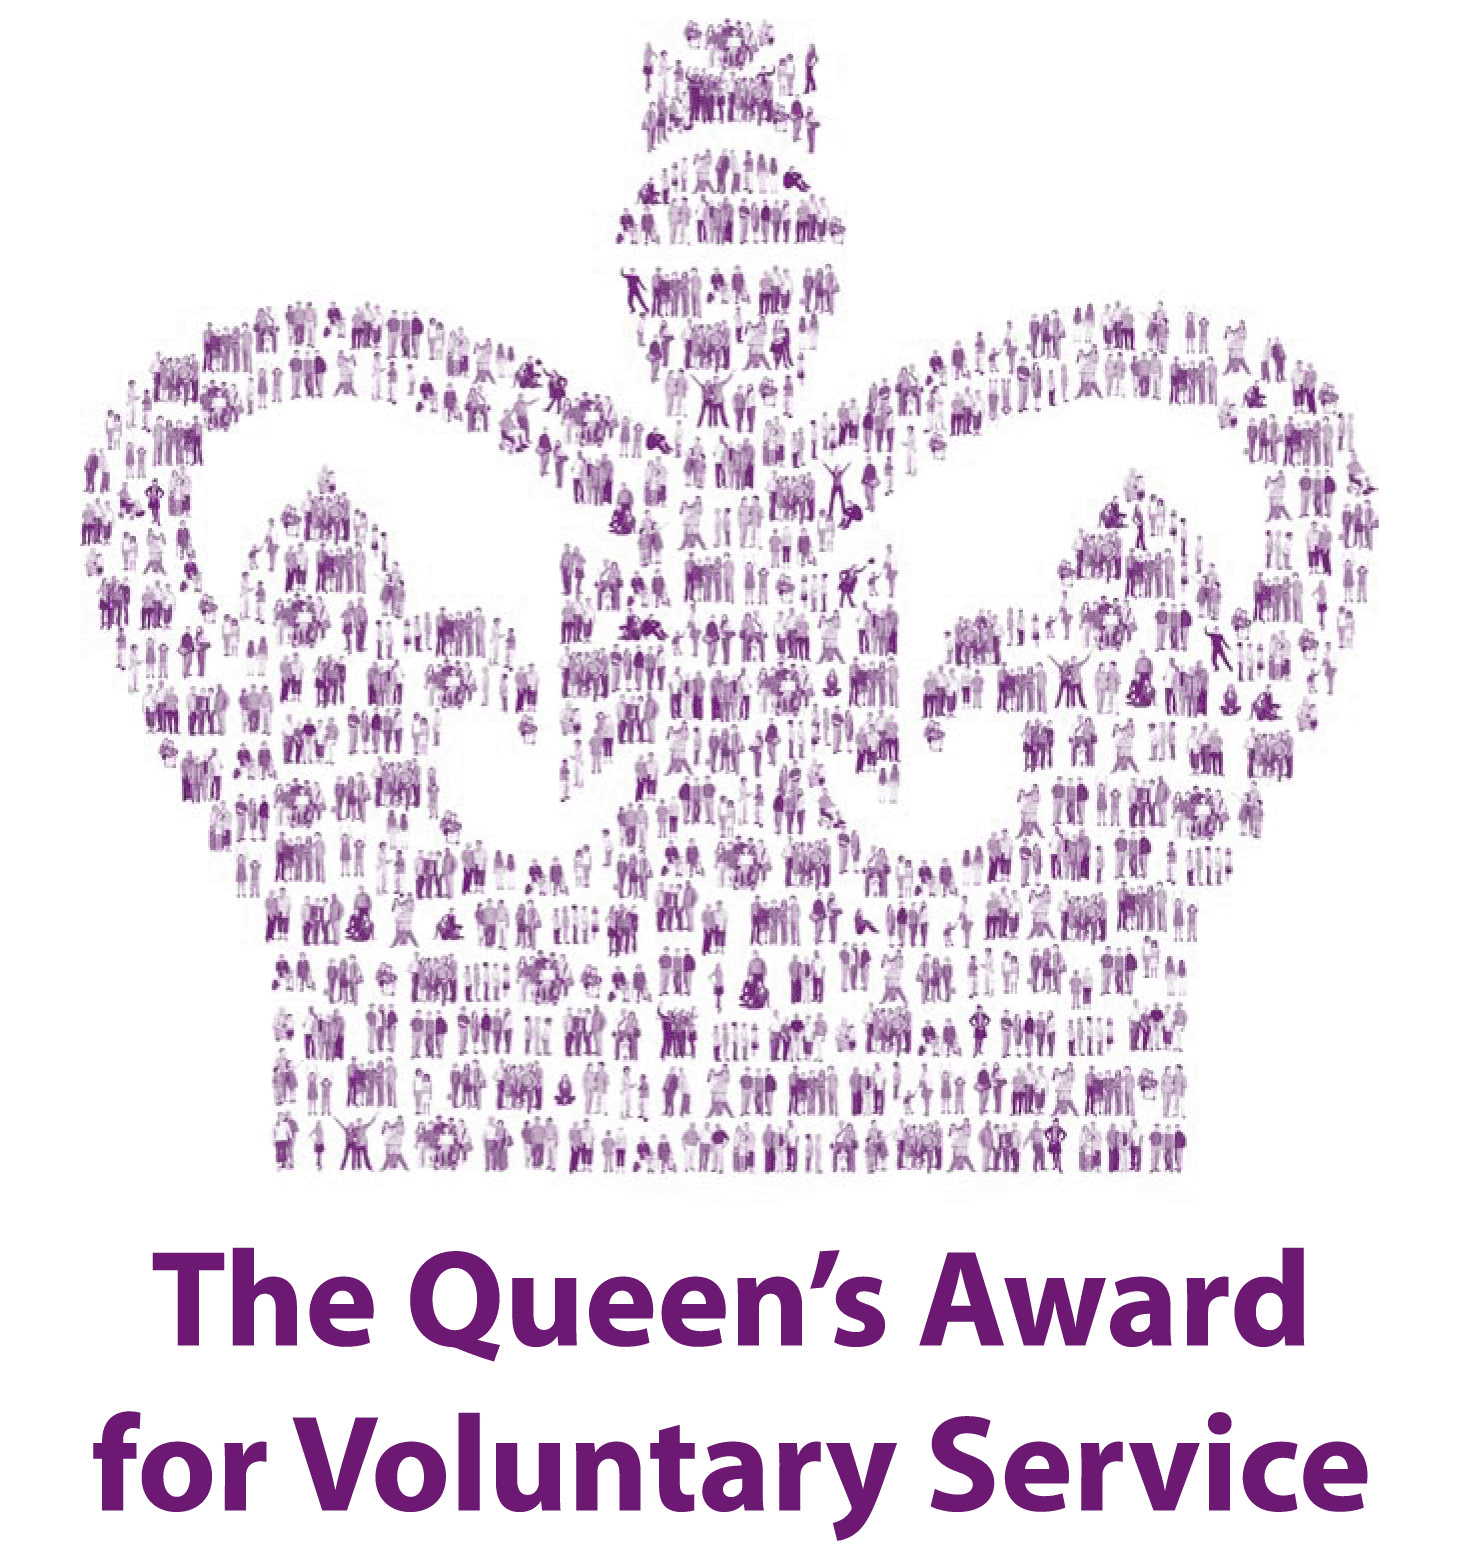 The Queen’s Award for Voluntary Service